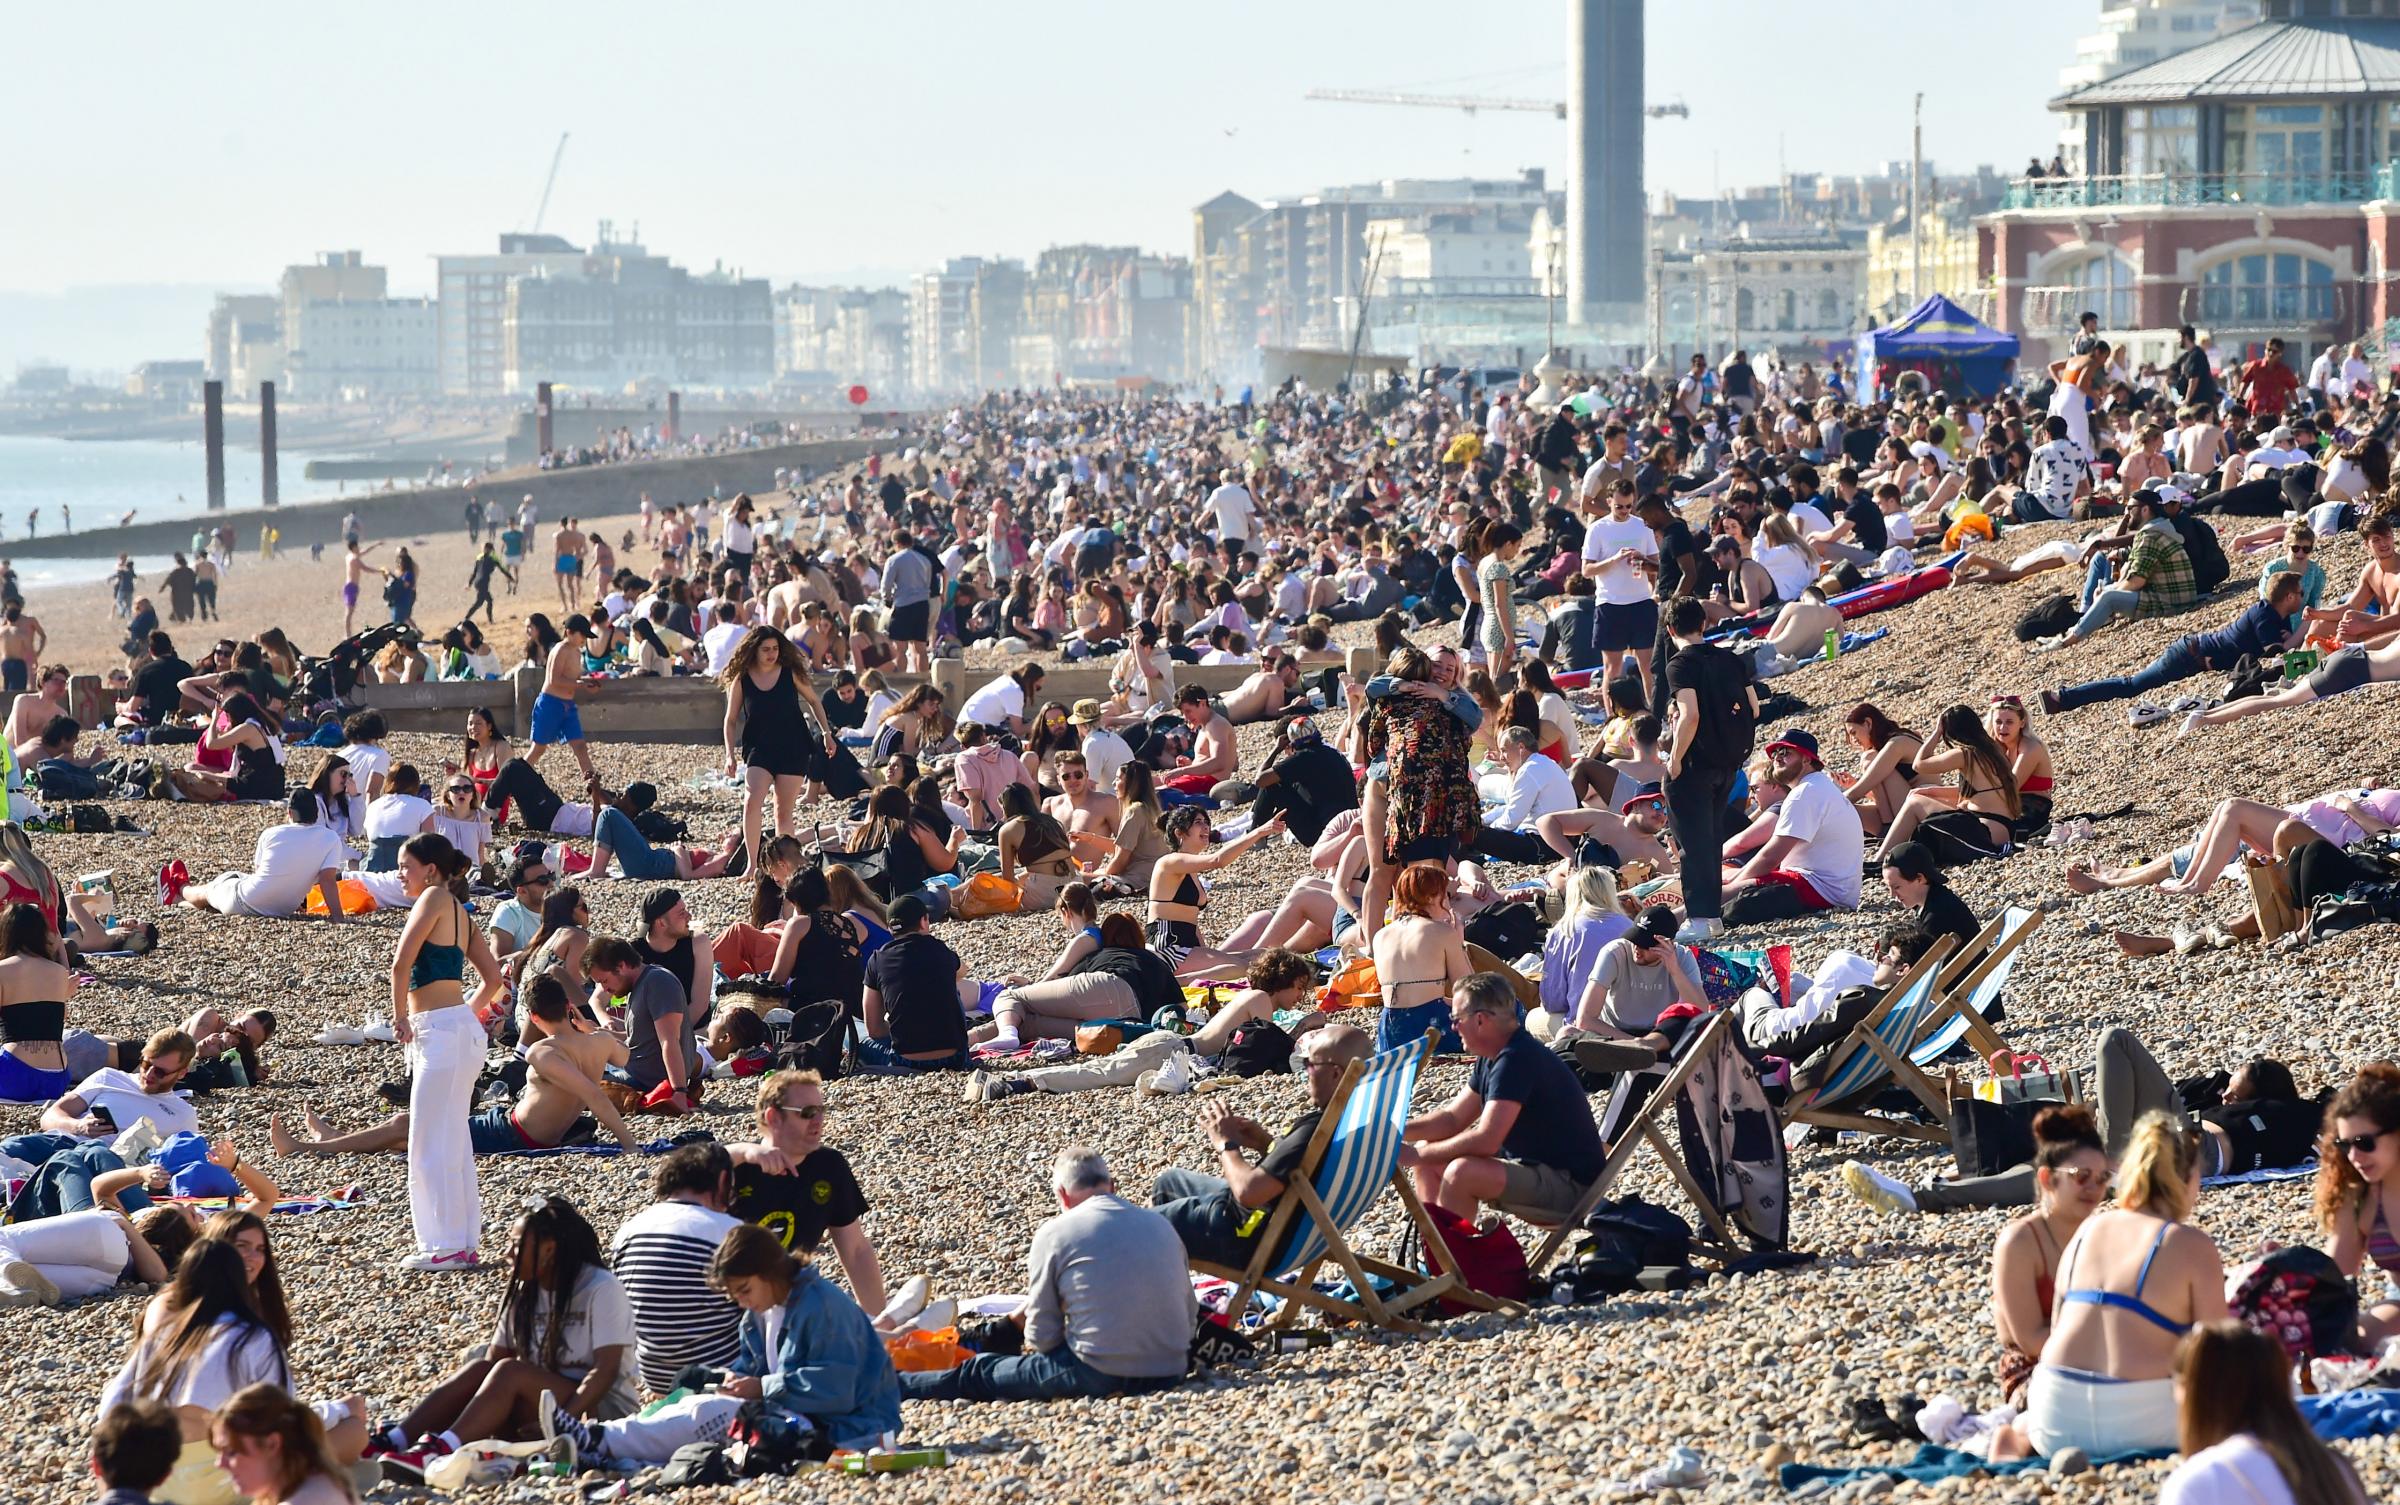 Brighton UK 30th March 2021 - Brighton beach is packed as visitors flock to the seaside on the hottest day of the year so far with temperatures reaching the mid 20s centigrade in parts of the South East : Credit Simon Dack / Alamy Live News.........